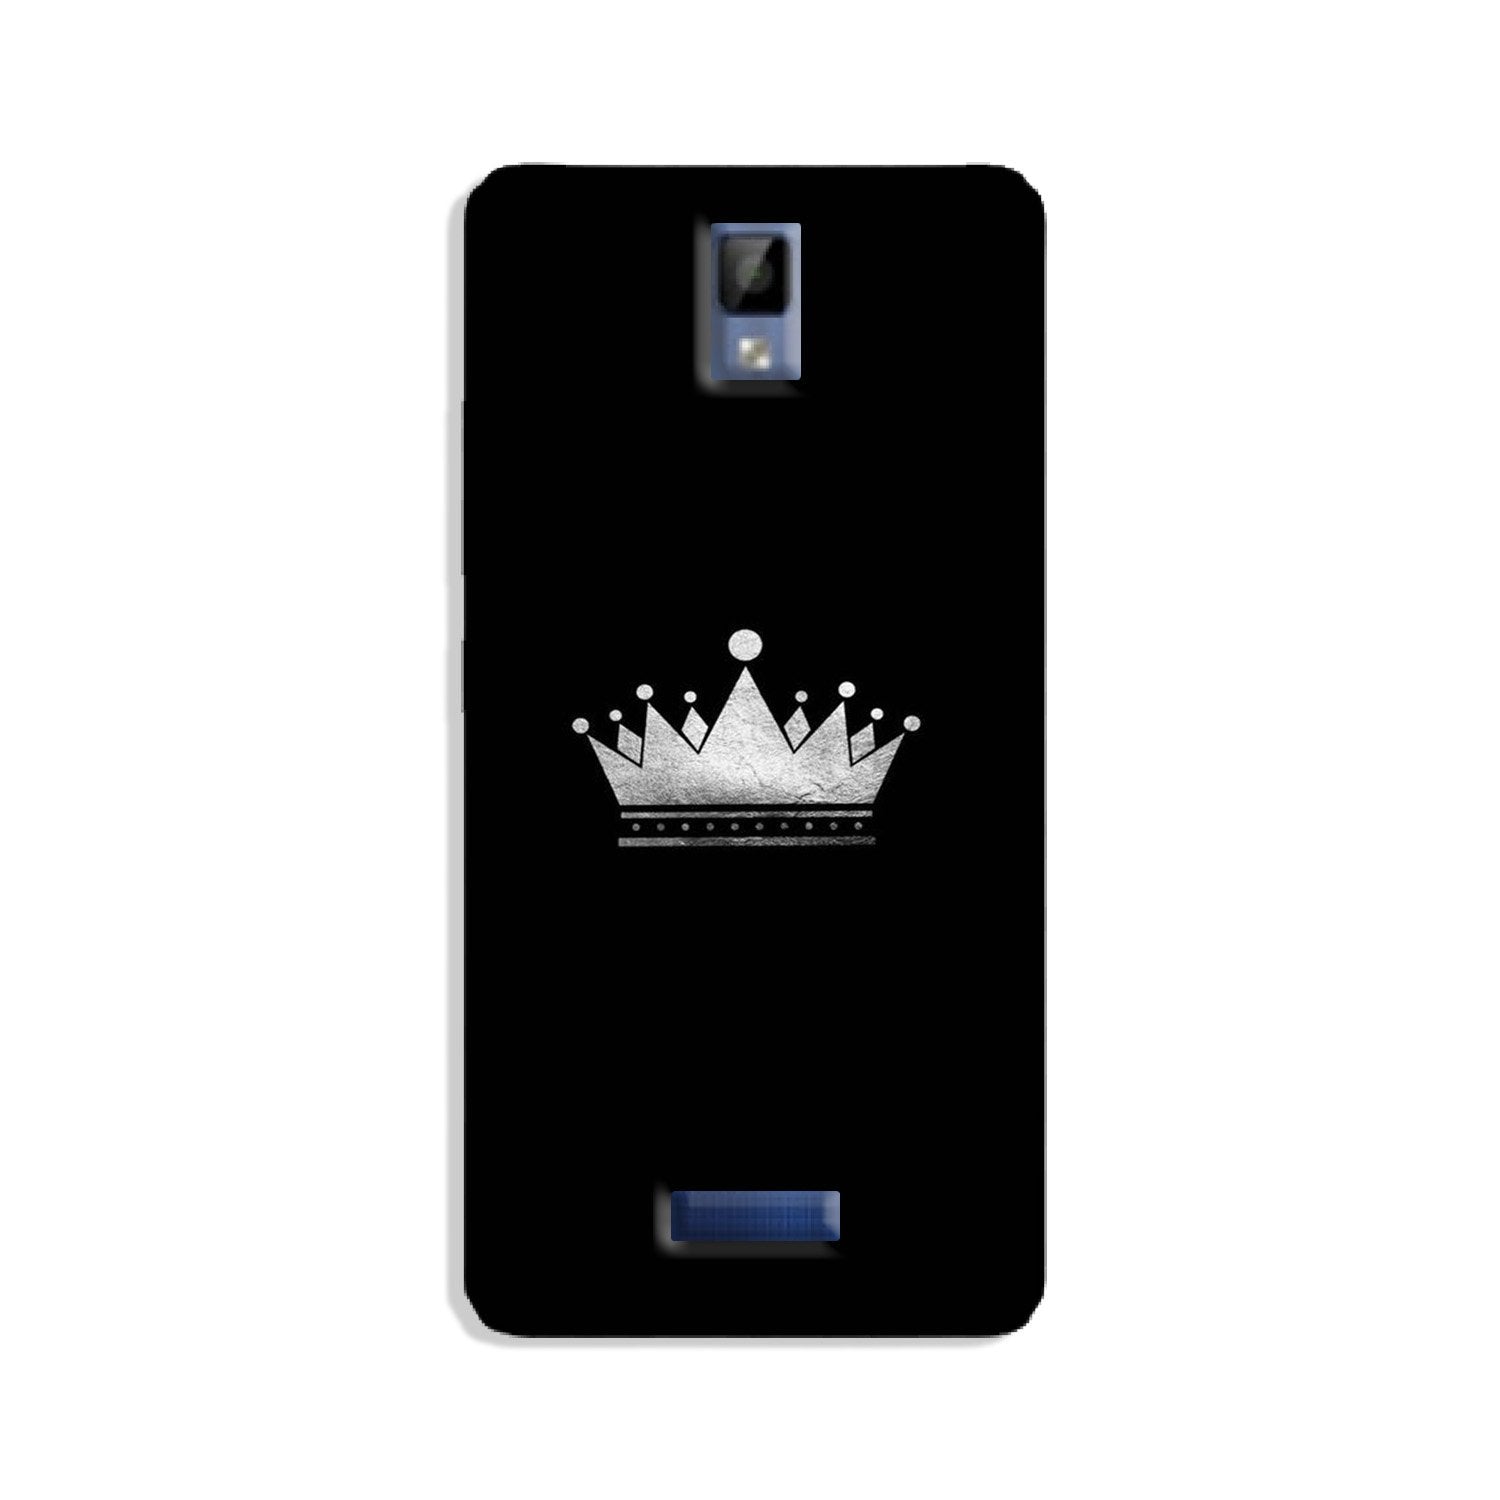 King Case for Gionee P7 (Design No. 280)